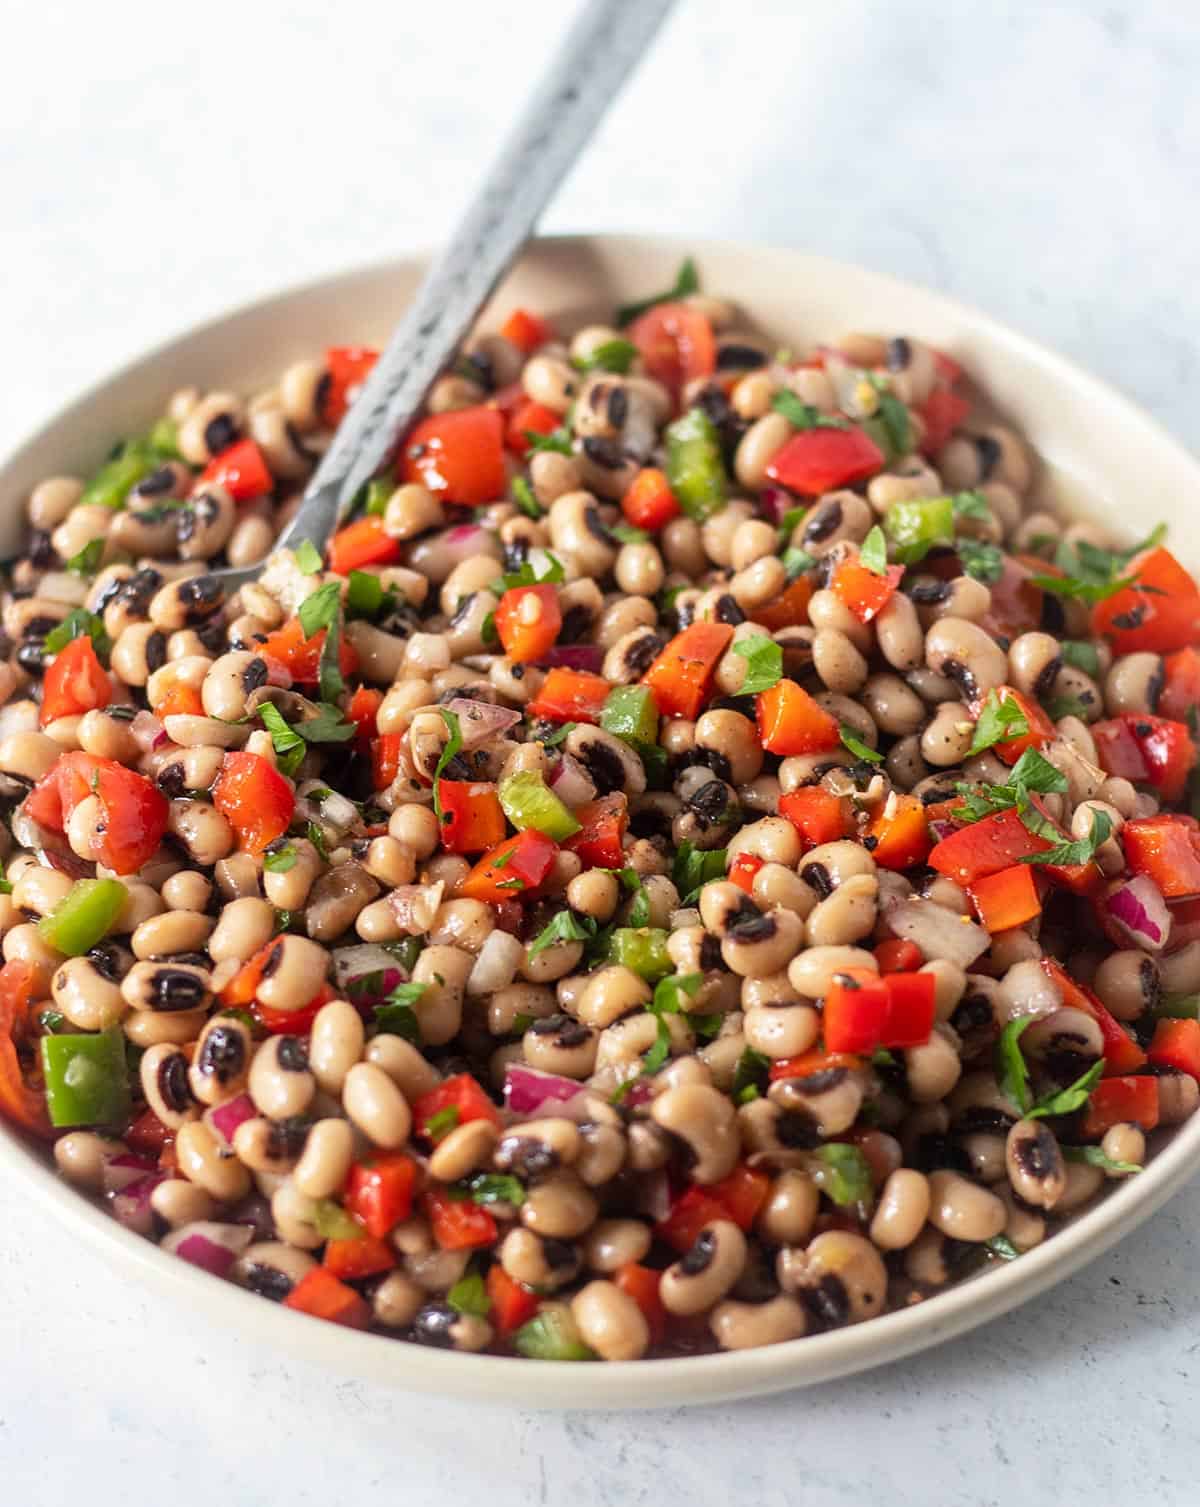 Black-eyed pea salad in a white salad dish with a silver spoon for serving.